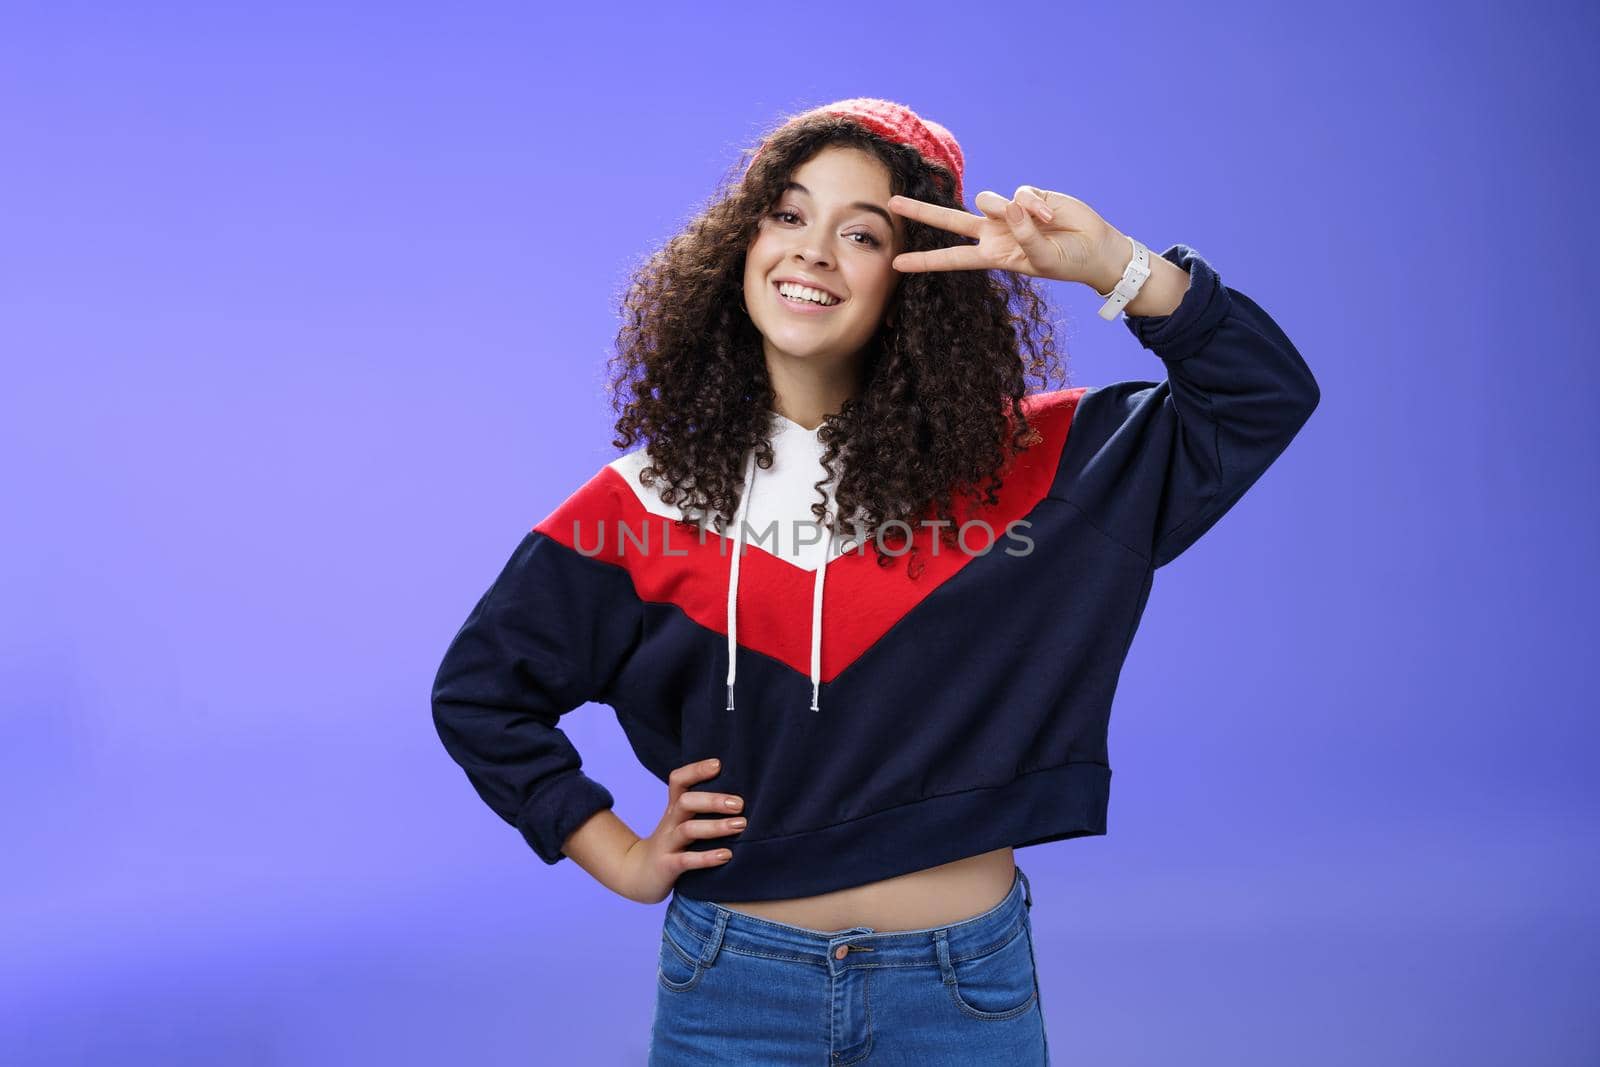 Attractive feminine woman with curly hairstyle in hat and sweatshirt showing peace or victory sign around eye and smiling carefree having fun playing in yard with snow over blue background by Benzoix